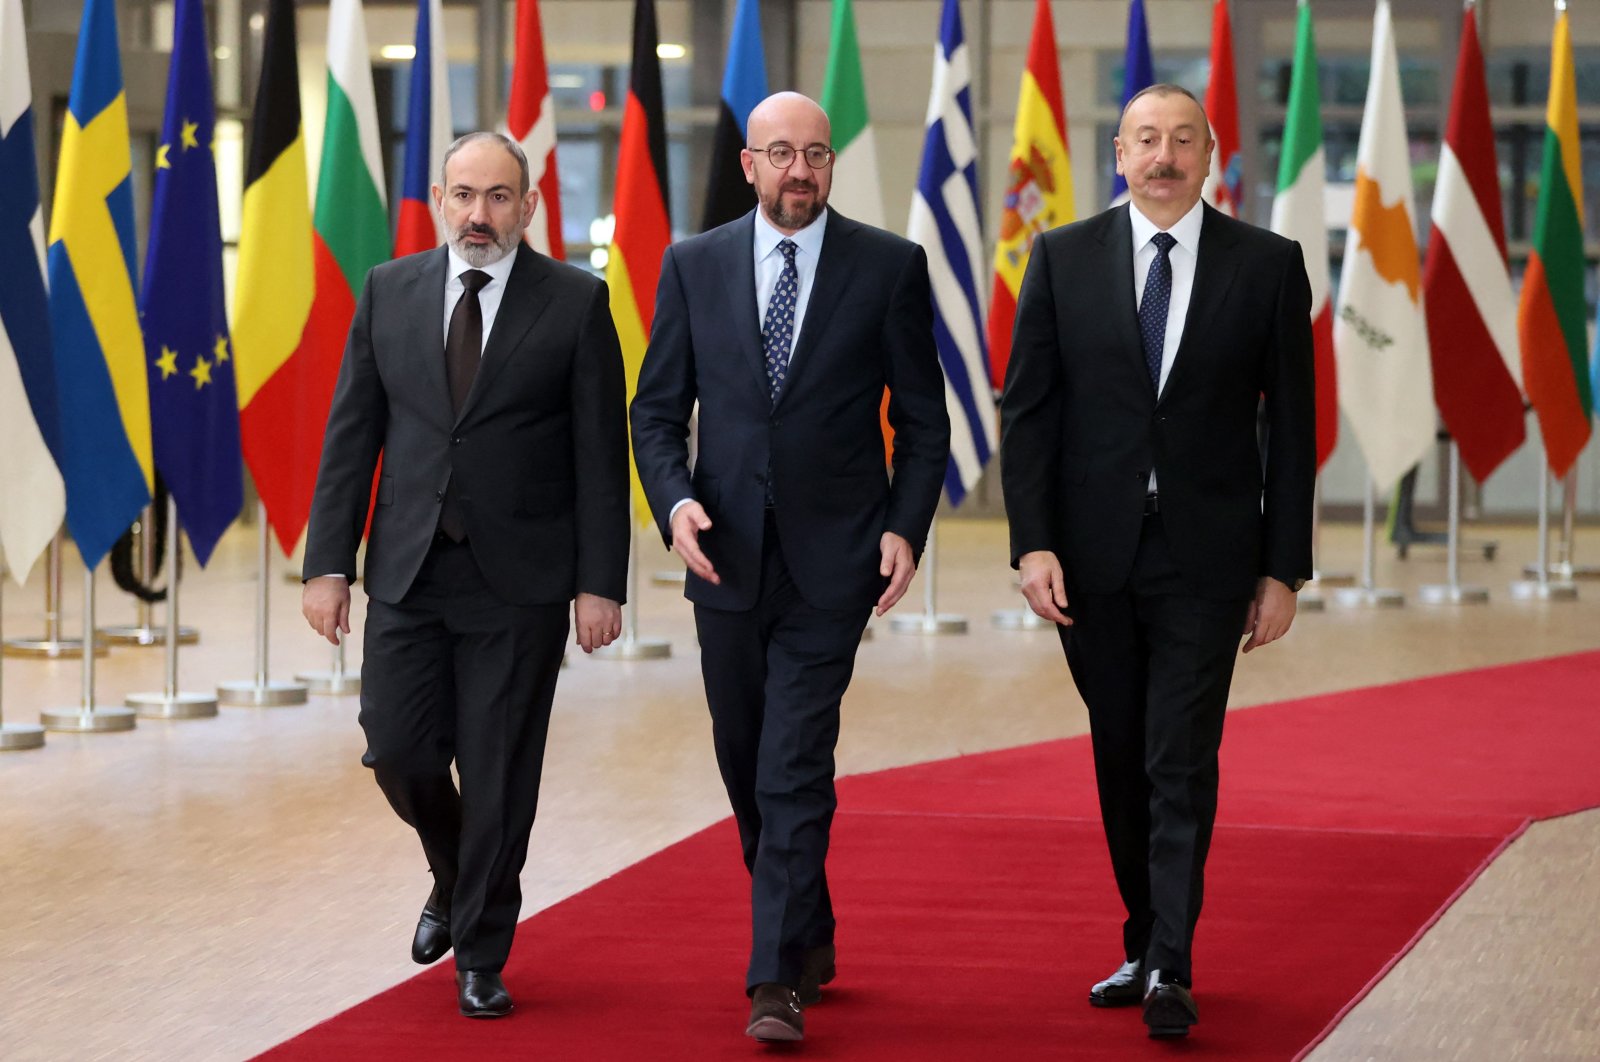 From left to right: Armenian Prime Minister Nikol Pashinian, President of the European Council Charles Michel and Azerbaijan&#039;s President Ilham Aliyev, arrive for an official picture before their meeting at the European Council in Brussels on April 6, 2022. (AFP Photo)